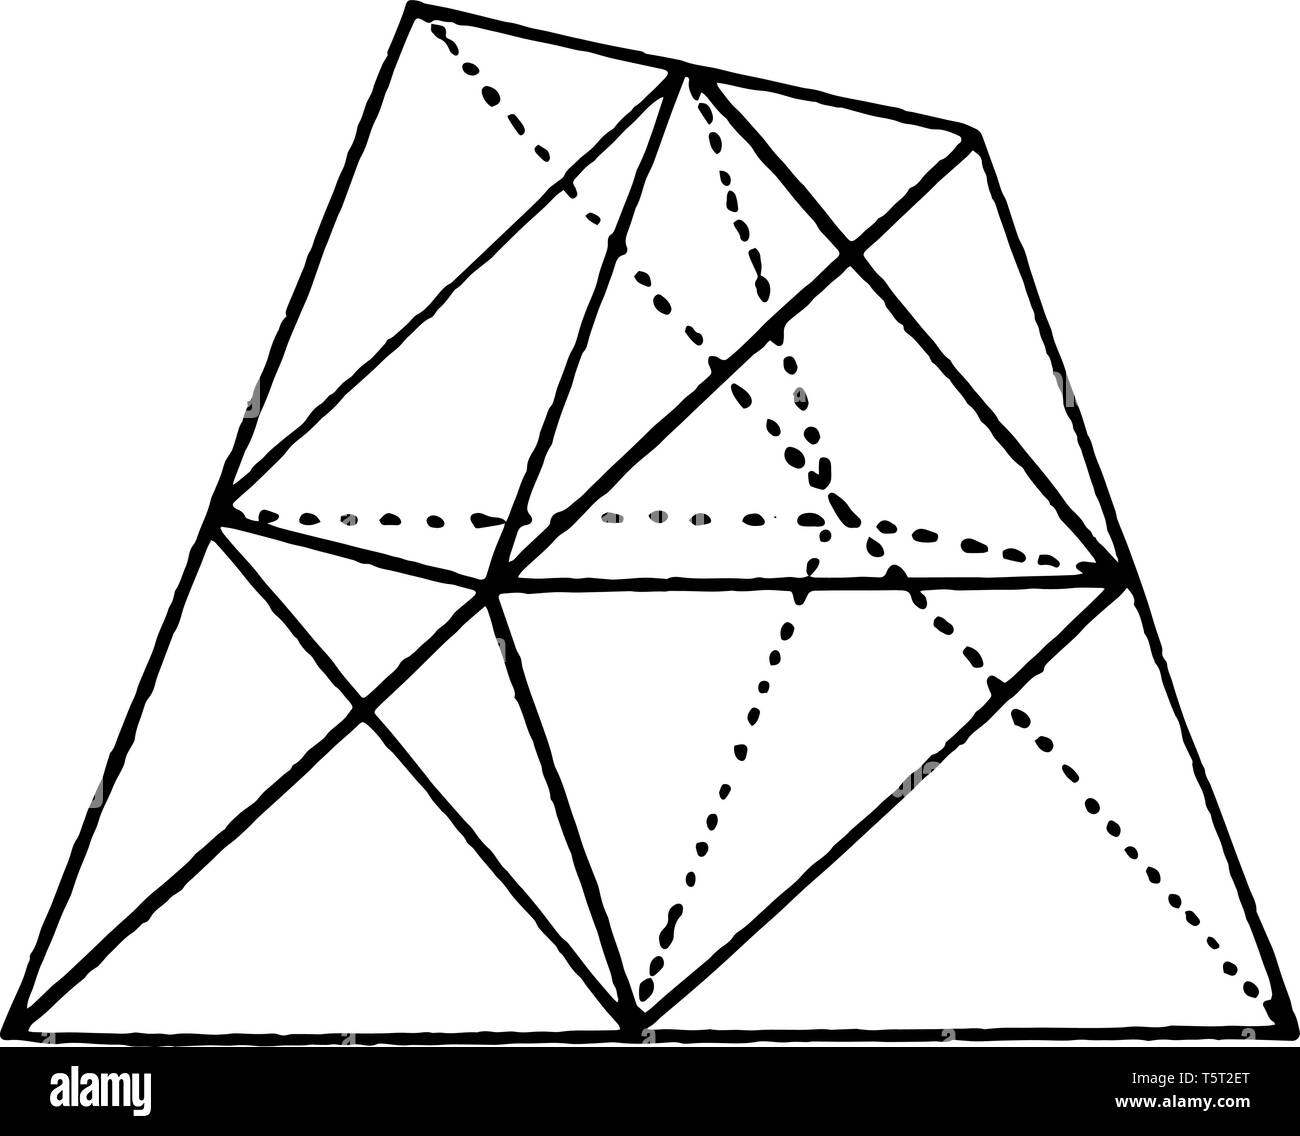 The tetrahedron octahedron shows is also known as a triangular pyramid. Not a polygon composed of four triangular faces, vintage line drawing or engra Stock Vector